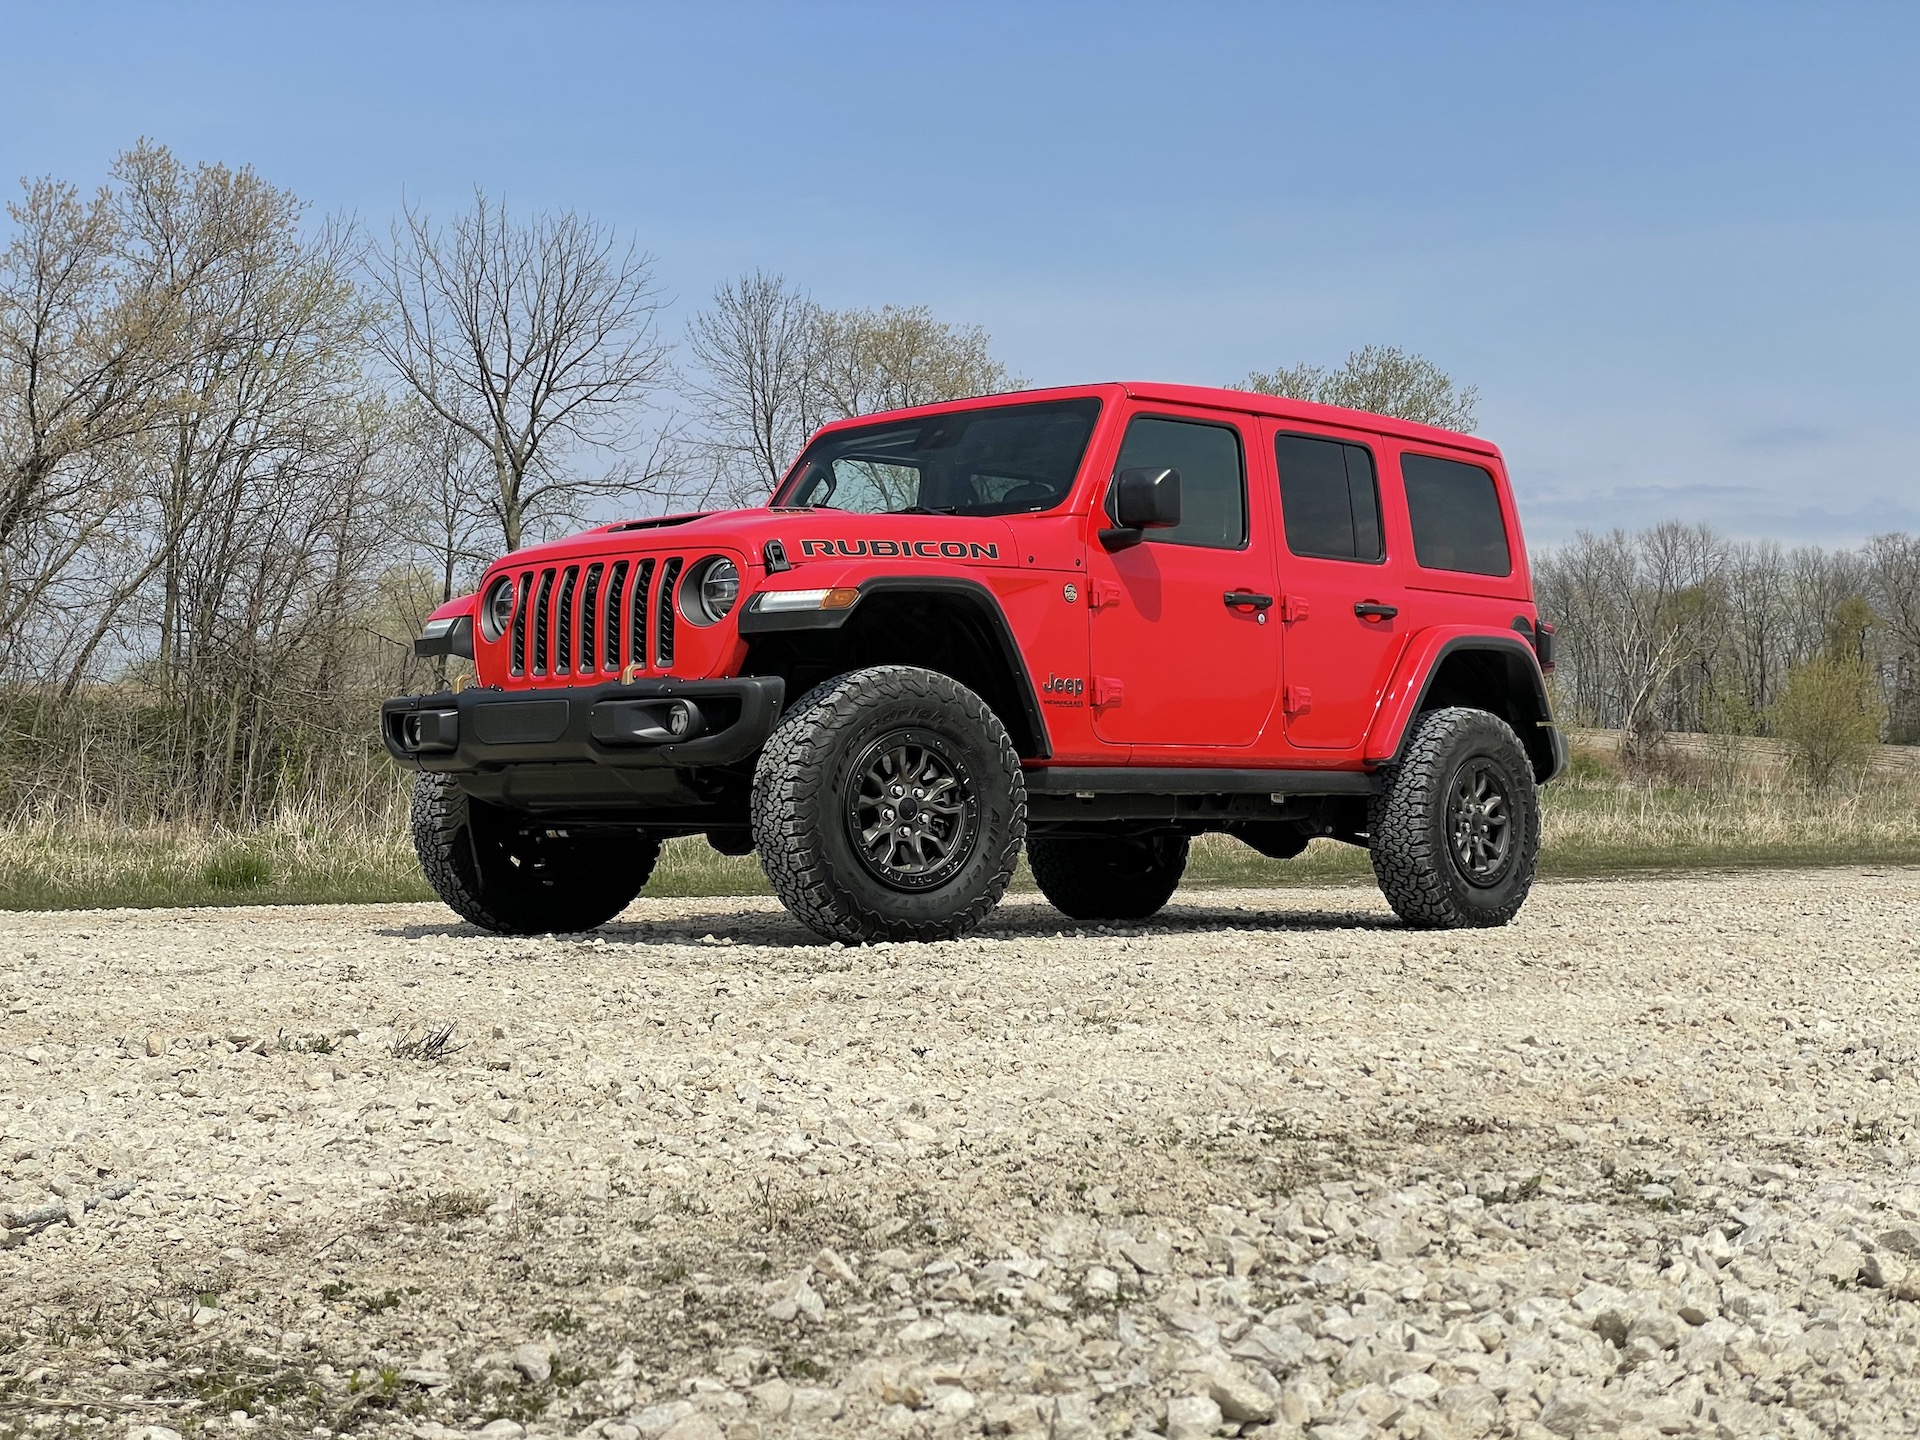 First drive review: 2021 Jeep Wrangler Rubicon 392 excels as a big-boy toy